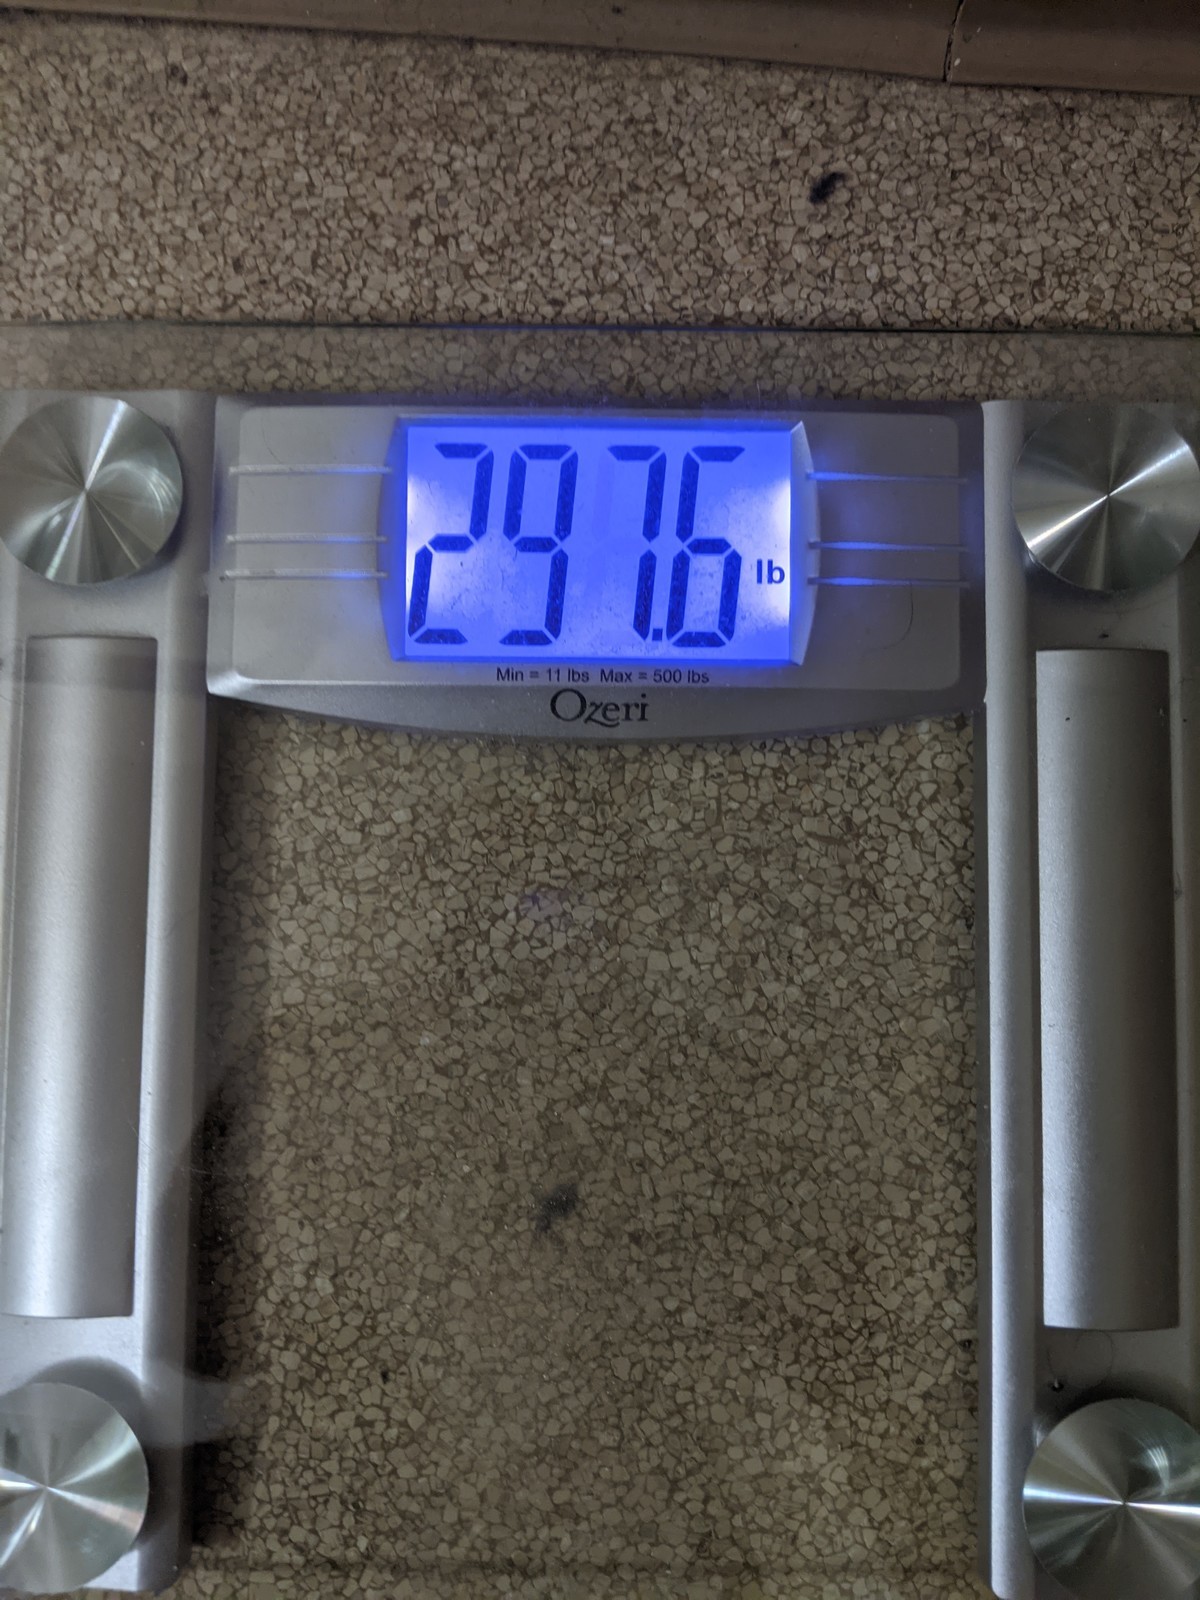 February 2021 weightloss. join list: WeightlossProgress (169 subs)Mention History This month...this month was rough. It started fine and then I woke up to news 